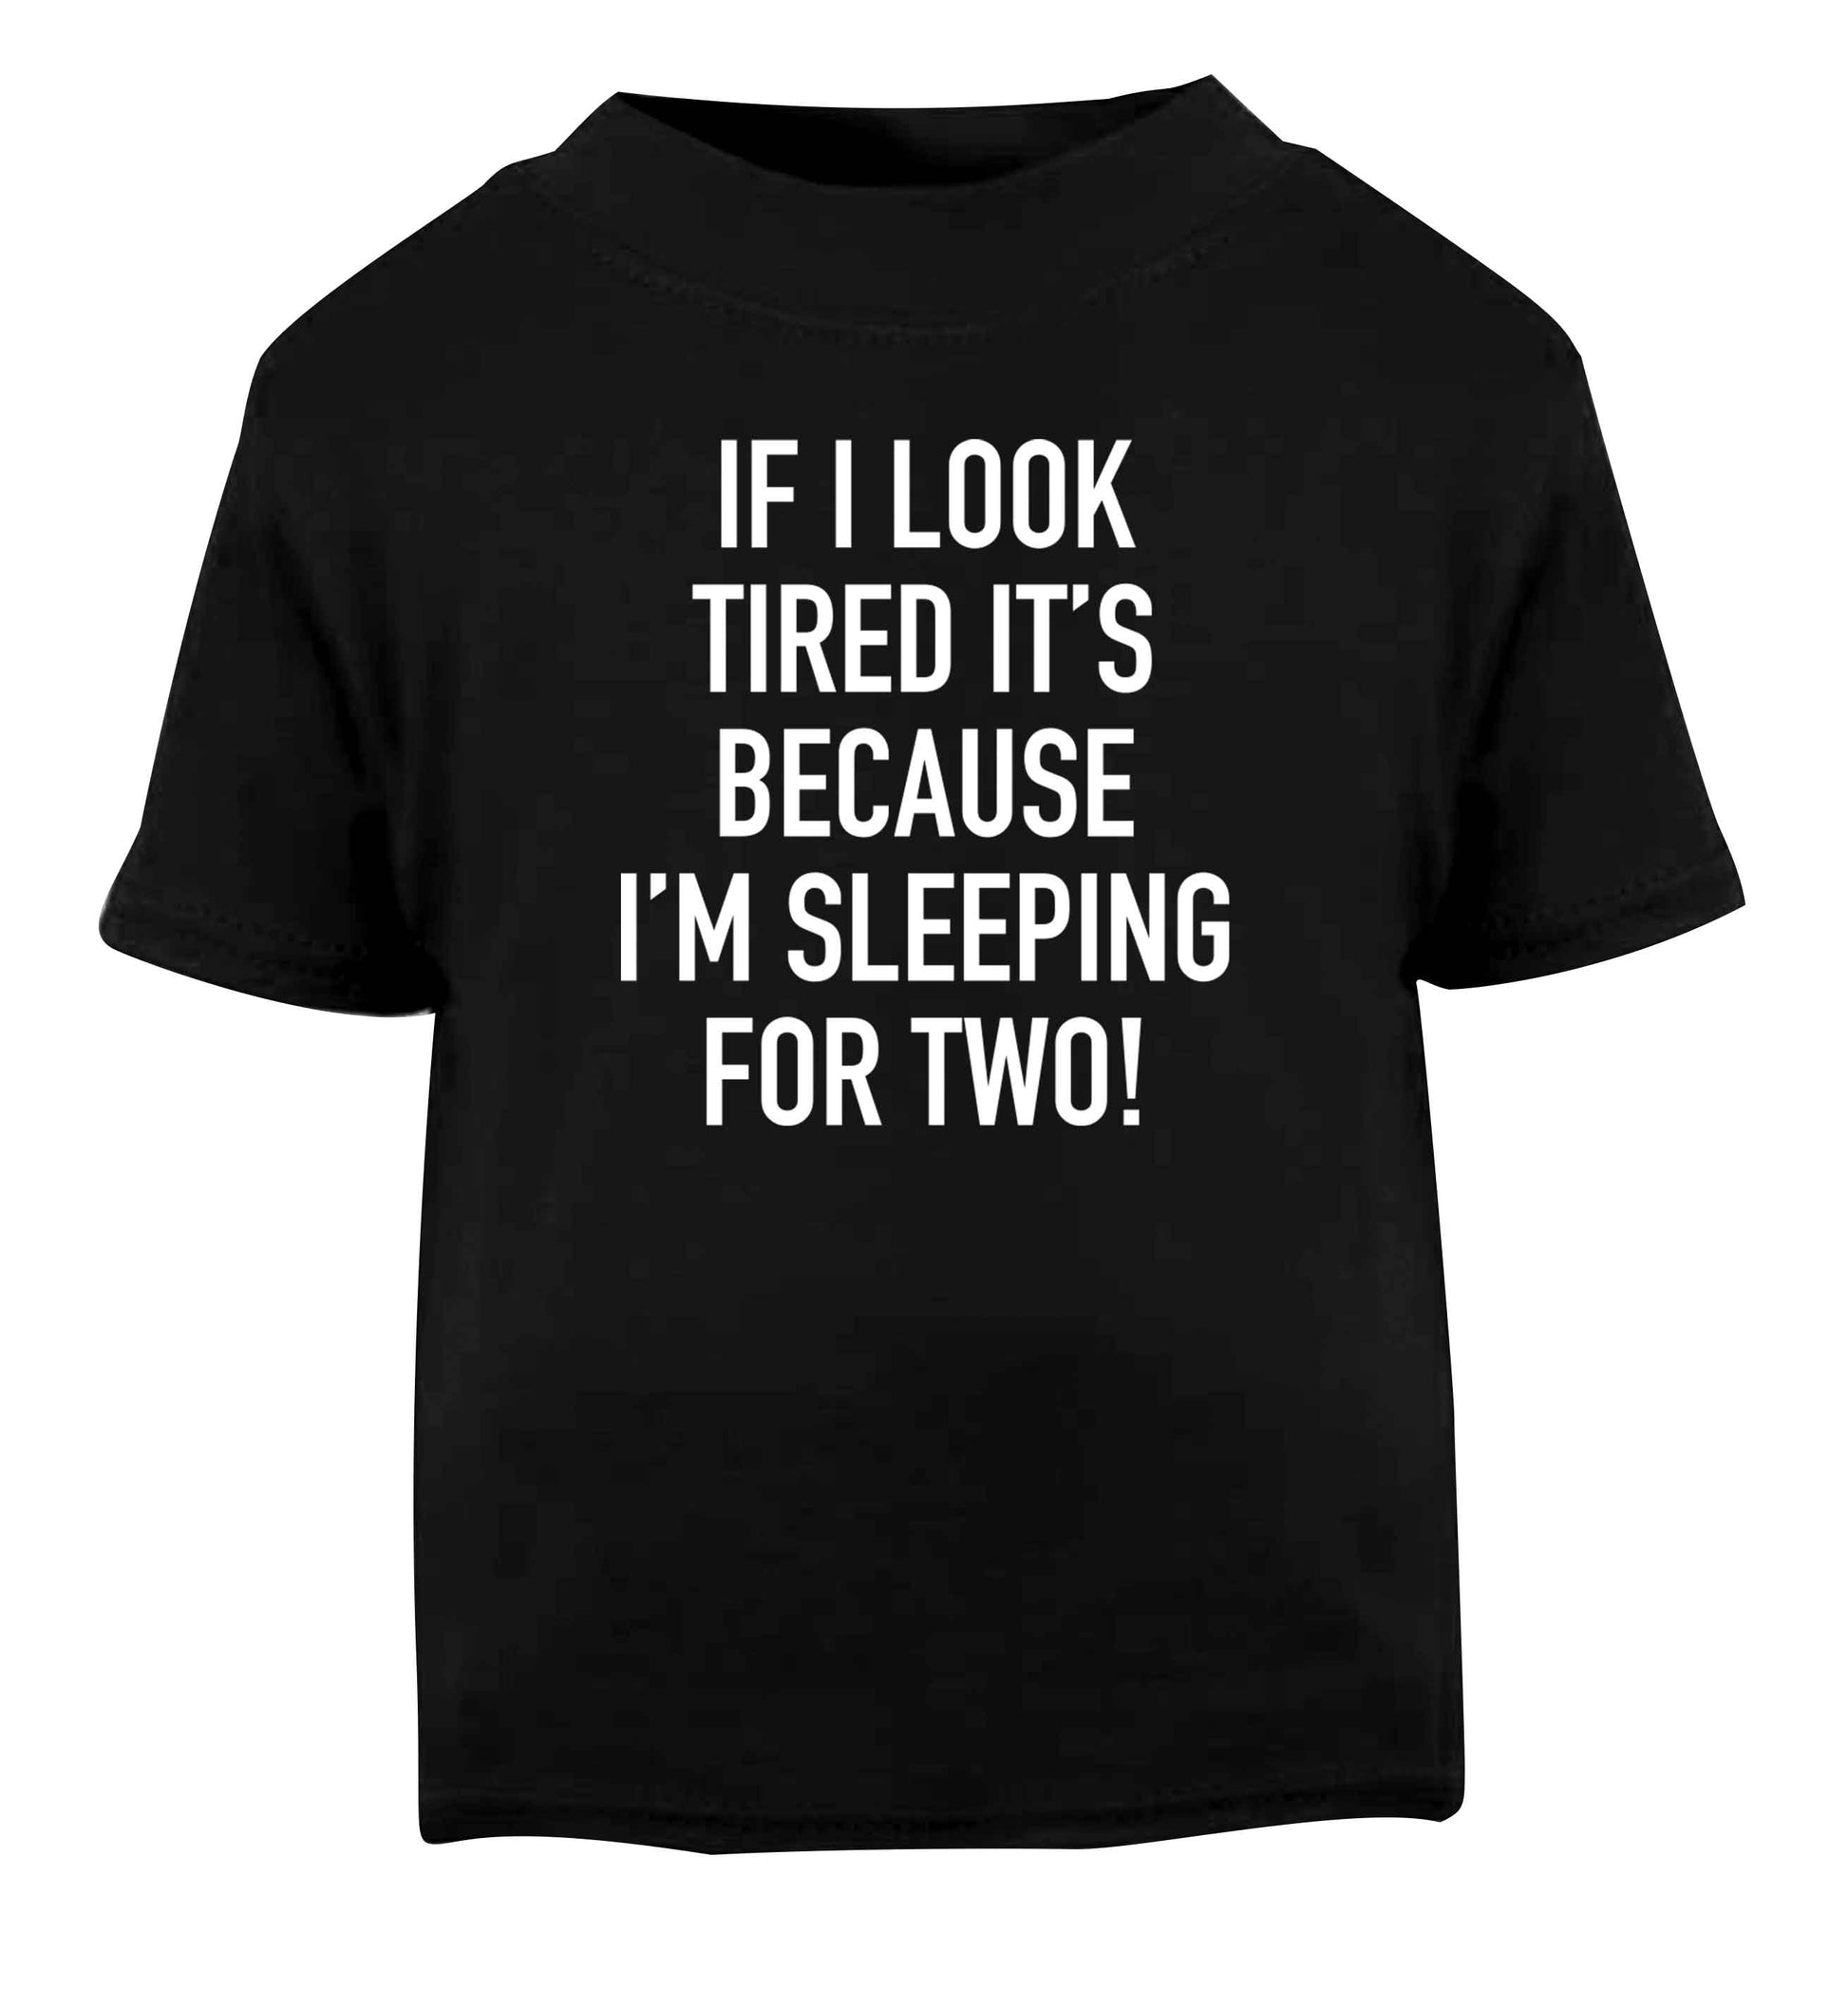 If I look tired it's because I'm sleeping for two Black Baby Toddler Tshirt 2 years